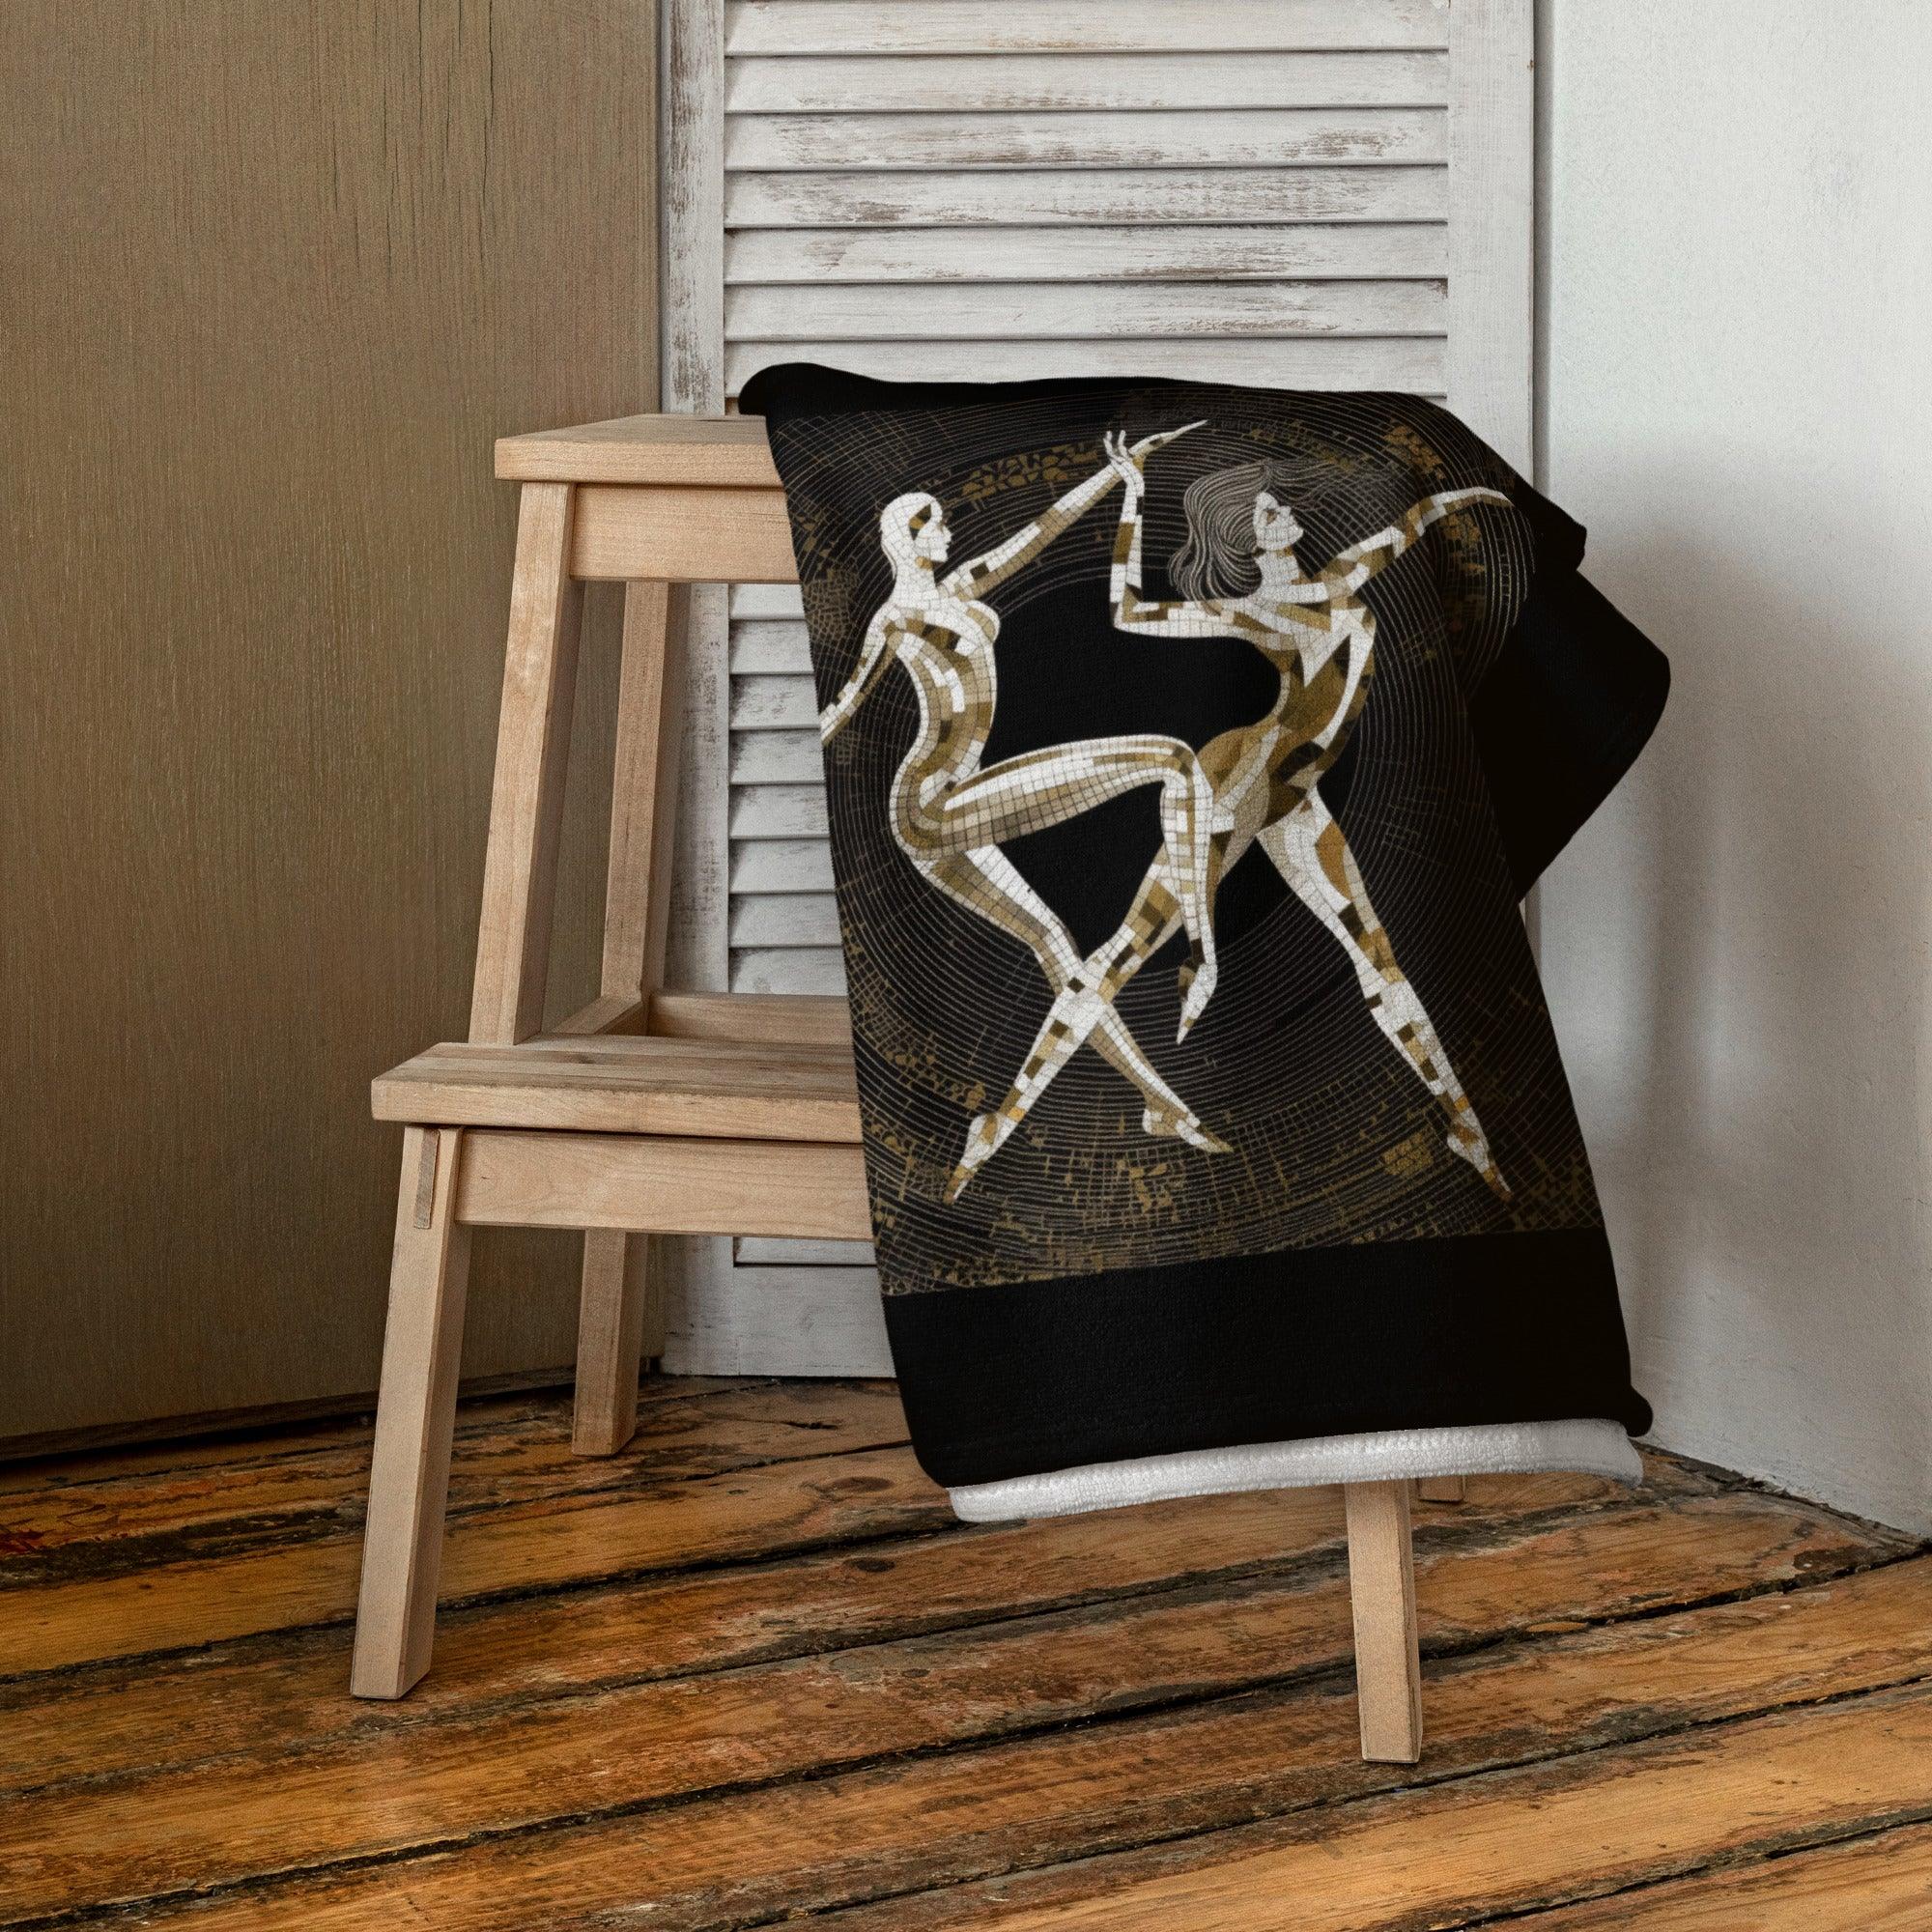 Elegant Balletic Extravaganza towel draped over a rack, showcasing its intricate design.